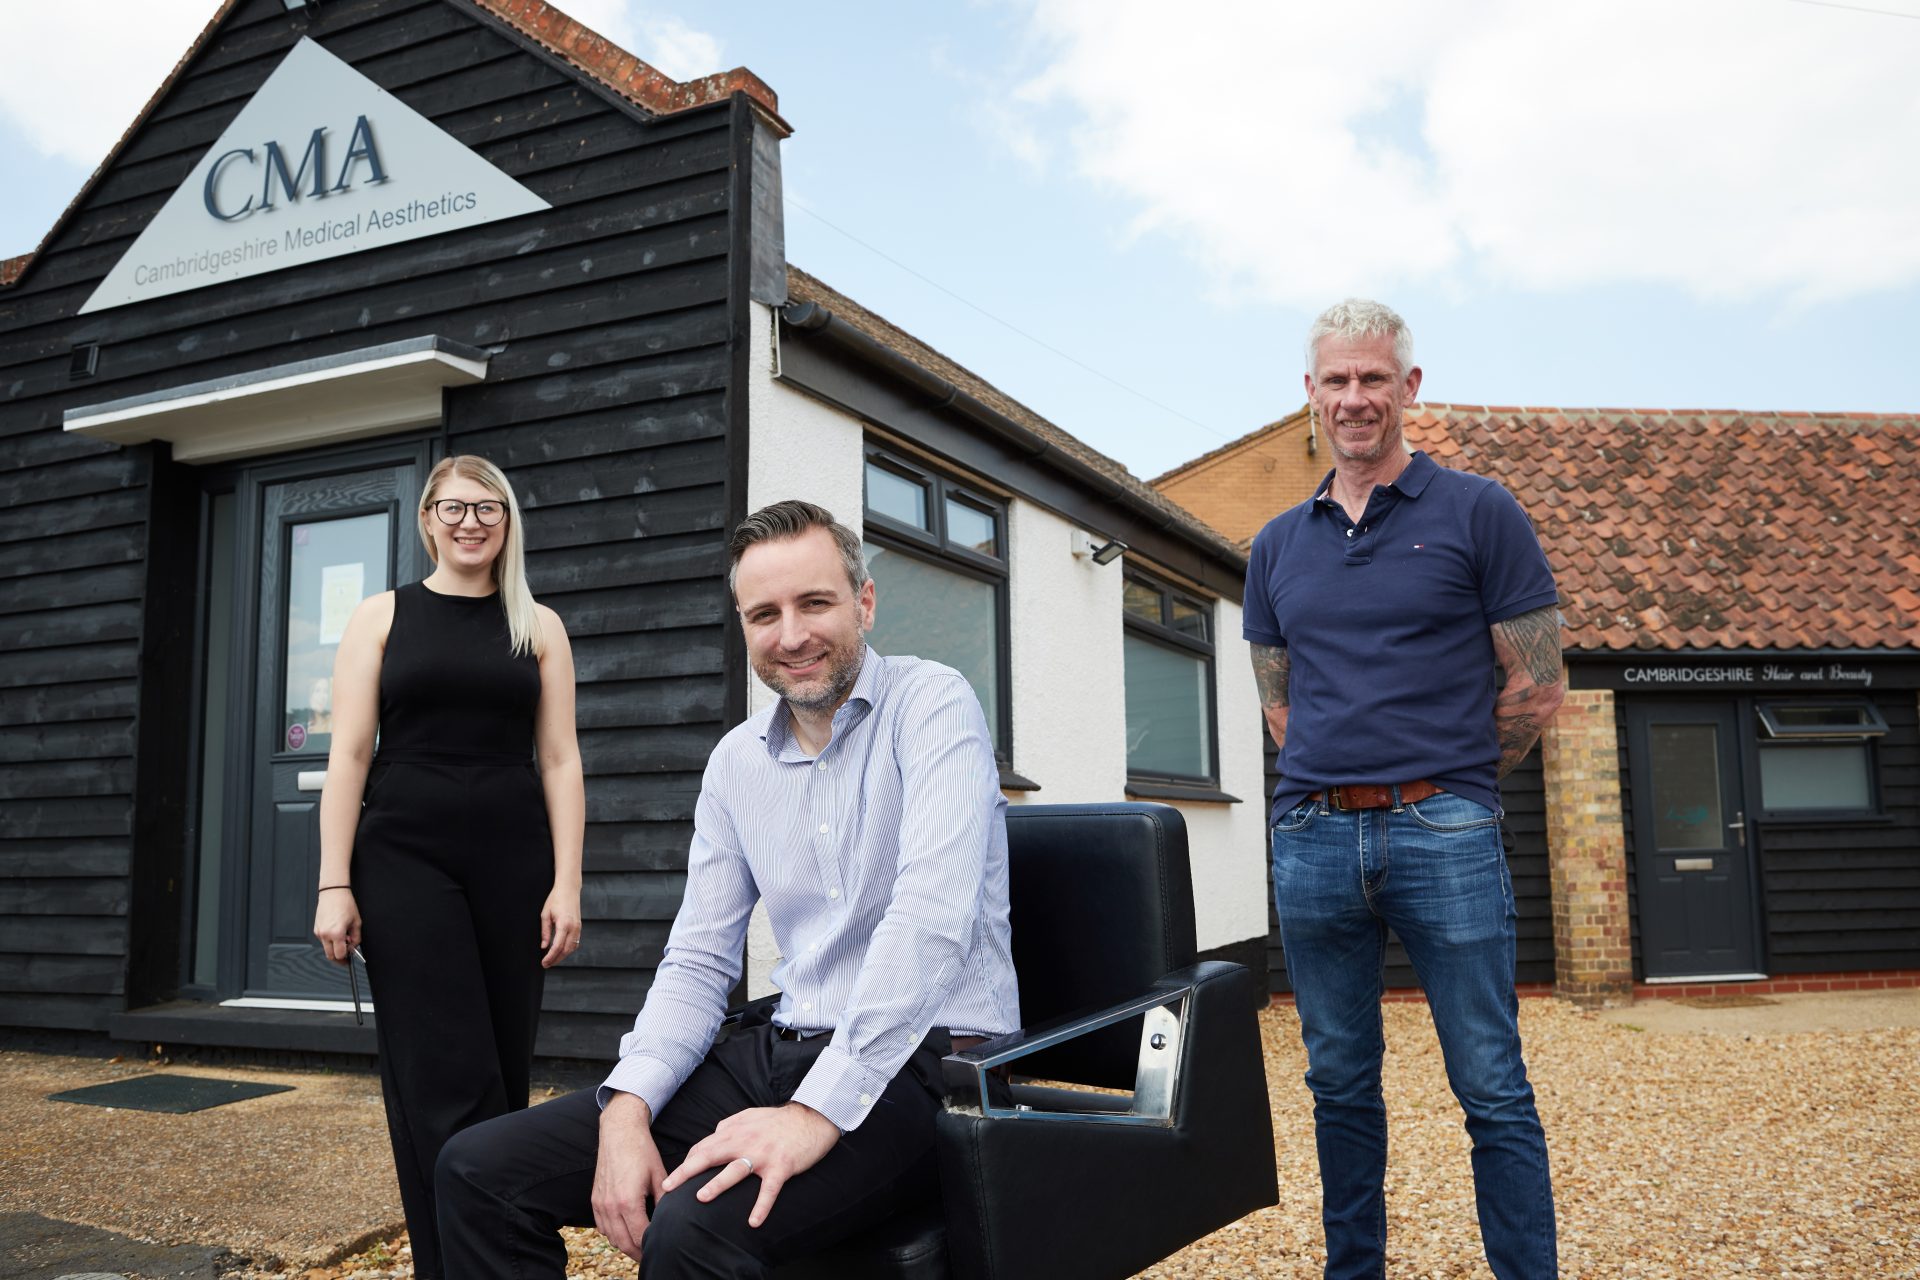 New business start up - Cambridgeshire Hair and Beauty